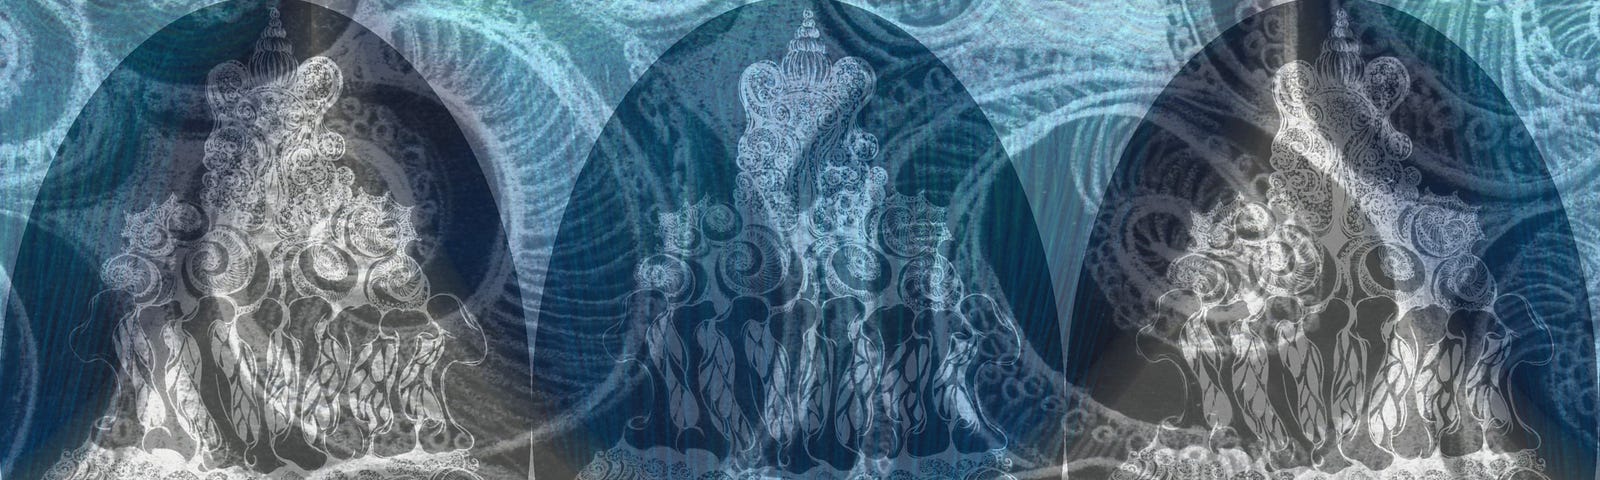 Abstract image of swirling bones in the shape of a cupcake in ovals grey and blue.